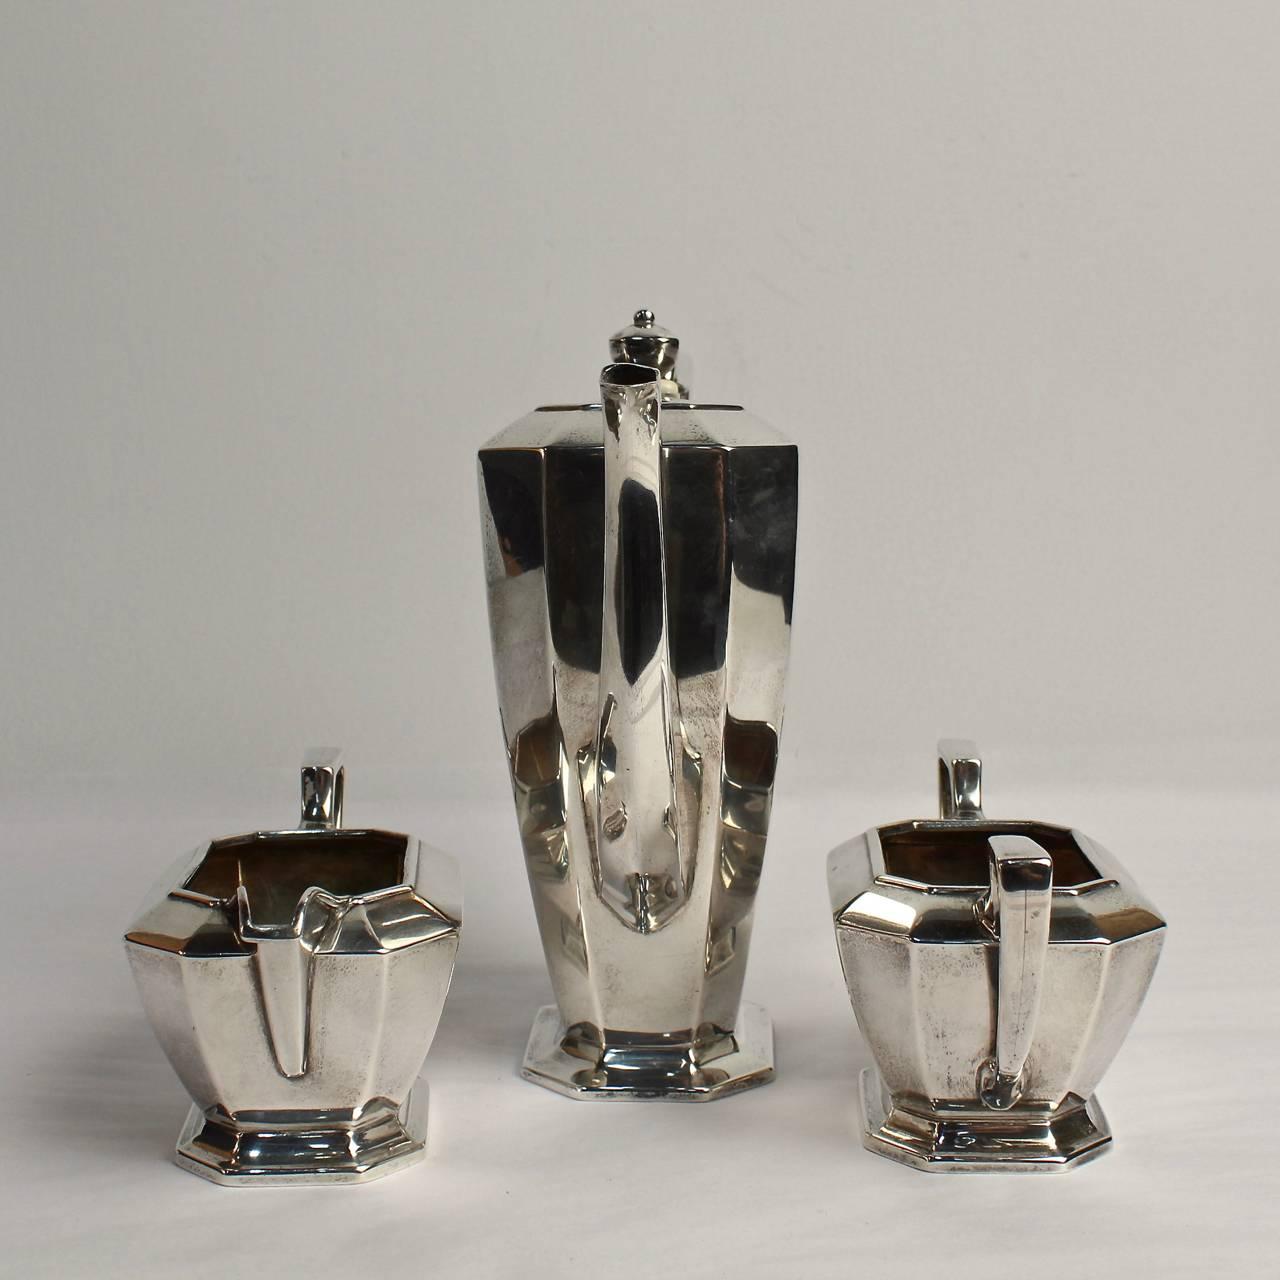 20th Century Antique Gorham Fairfax Sterling Silver Tea Set with a Teapot, Creamer and Sugar